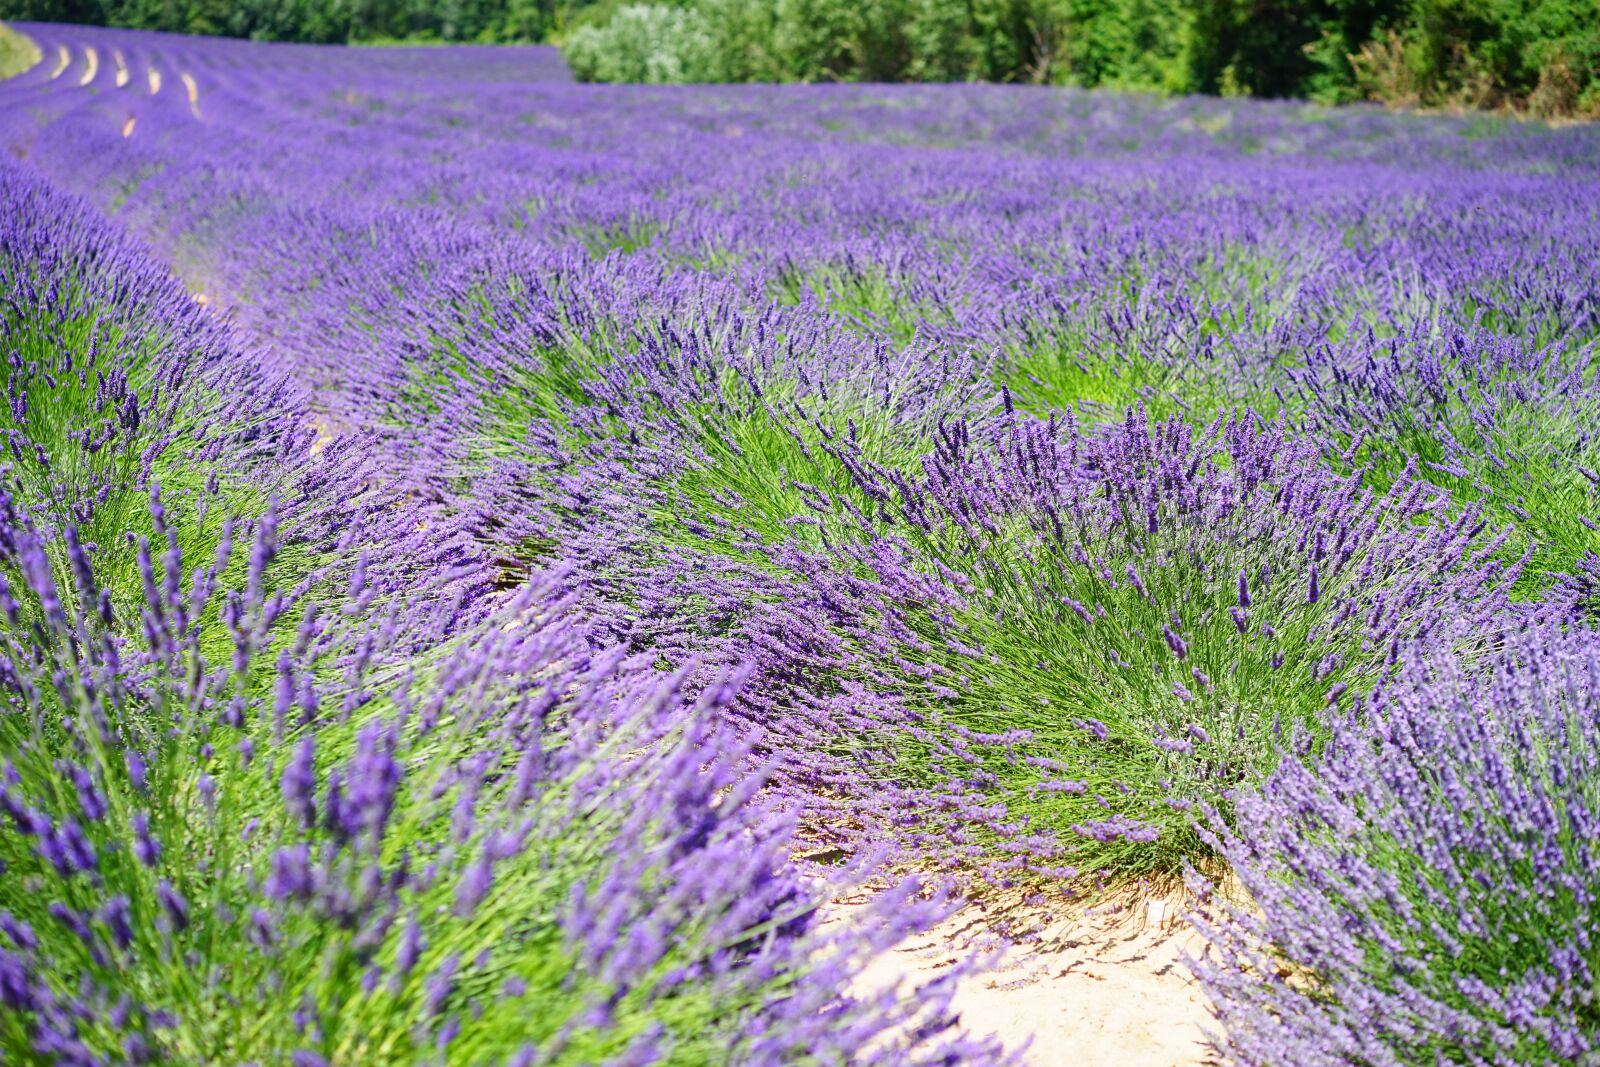 Sony a7 sample photo. Lavender cultivation, lavender, lavender photography